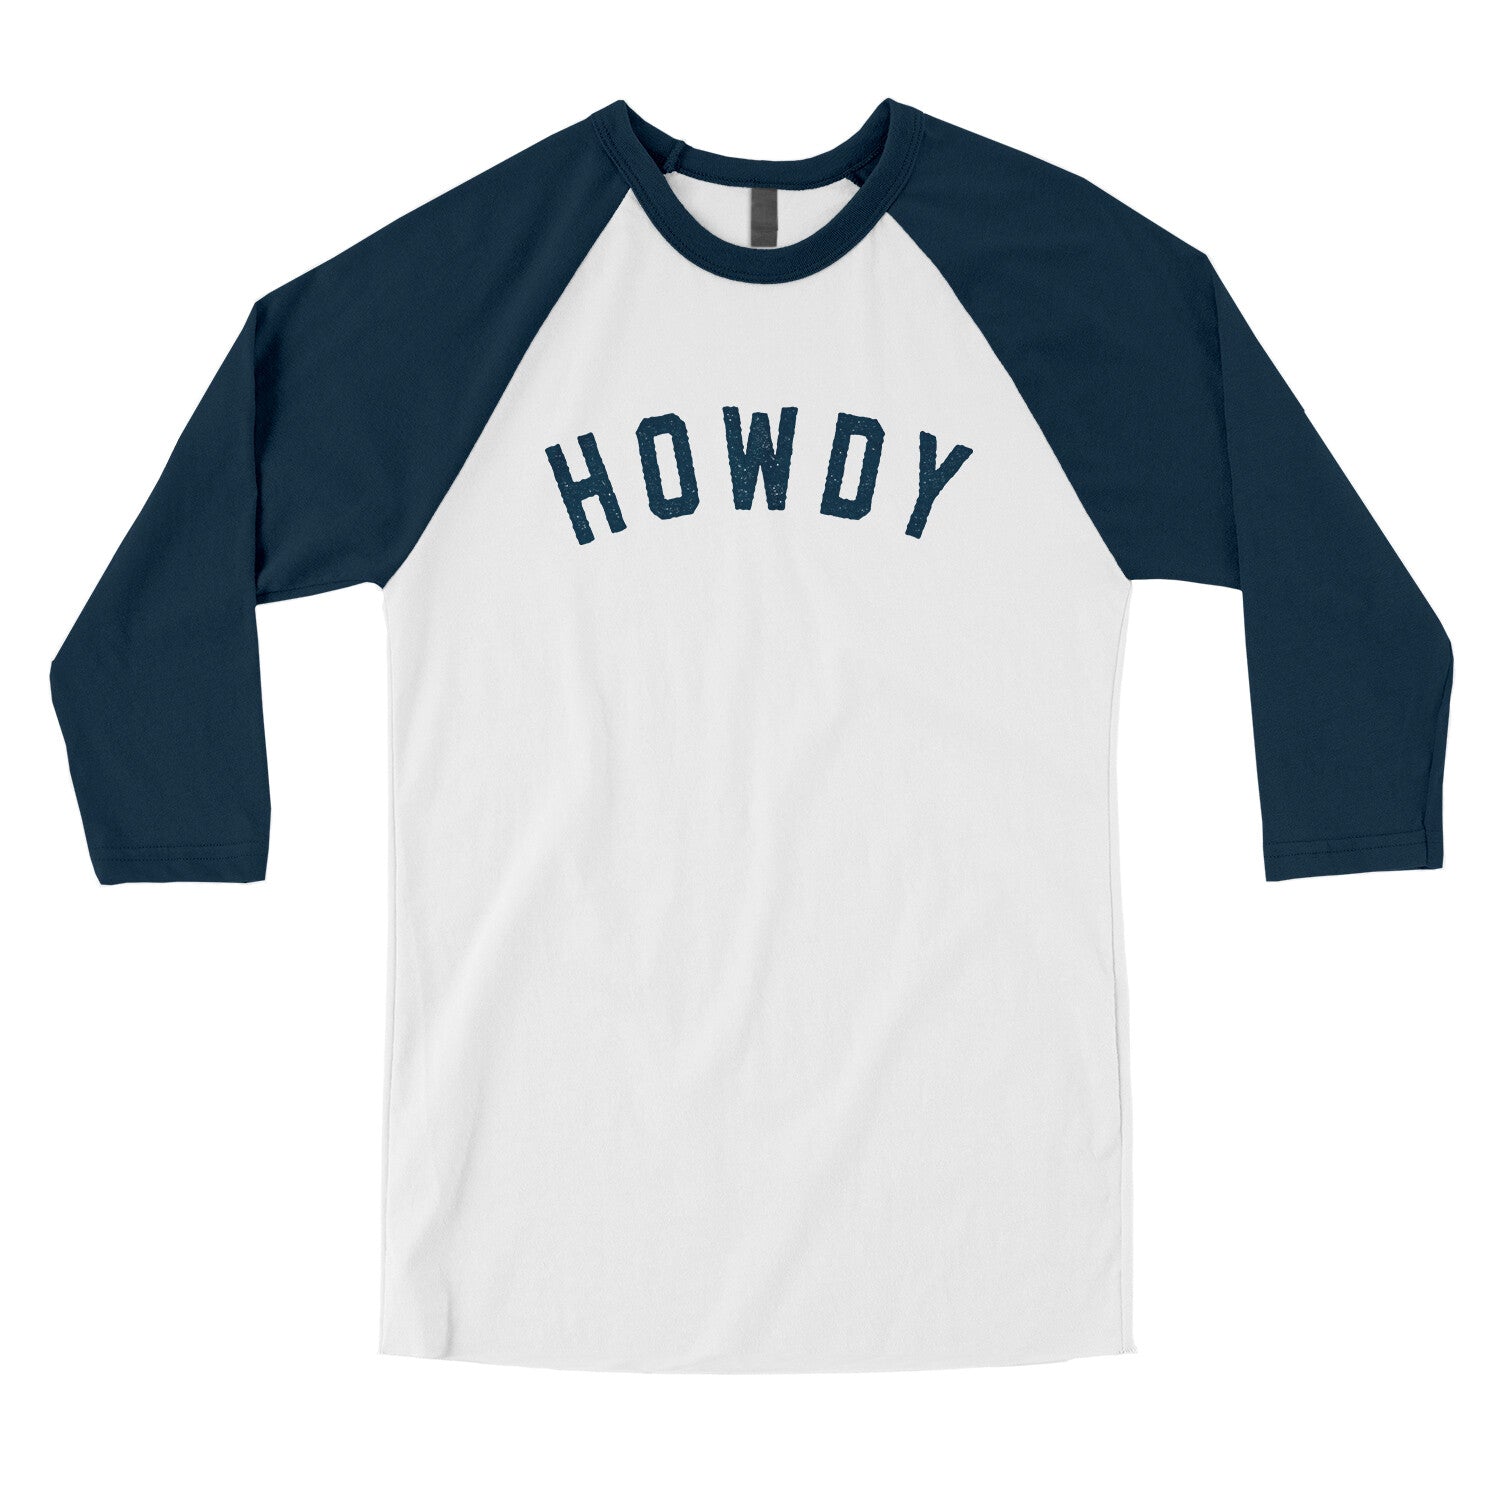 Howdy in White with Navy Color